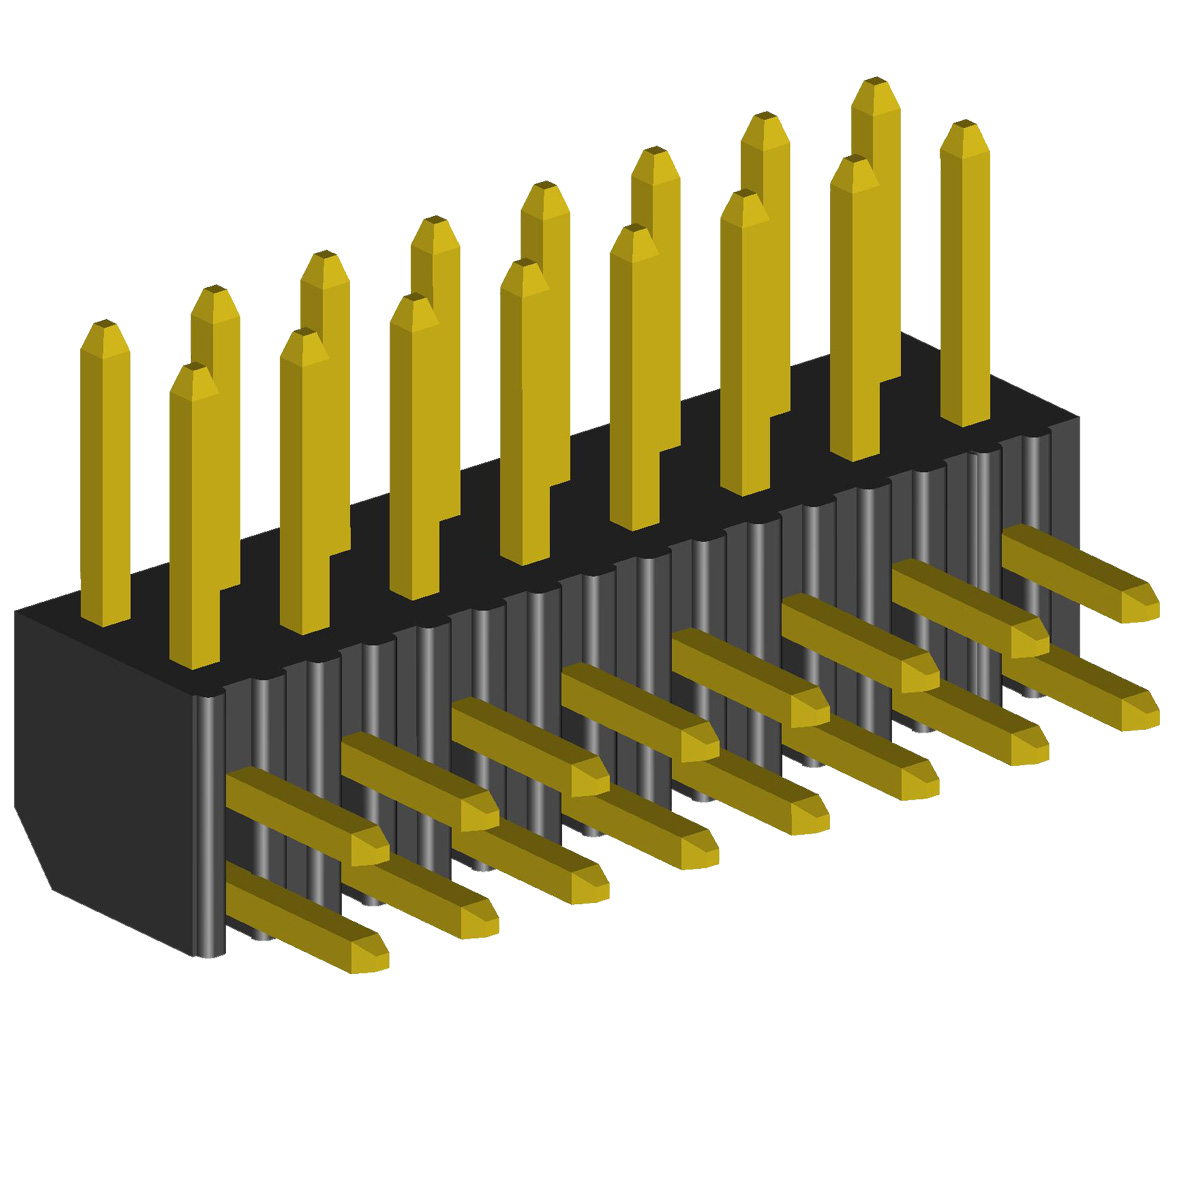 2204R-XXG-XXXX series, fork pin double row open angular cost, with increased facility and mounting hole, pitch 2,0x2,0 mm, 2x40 pins